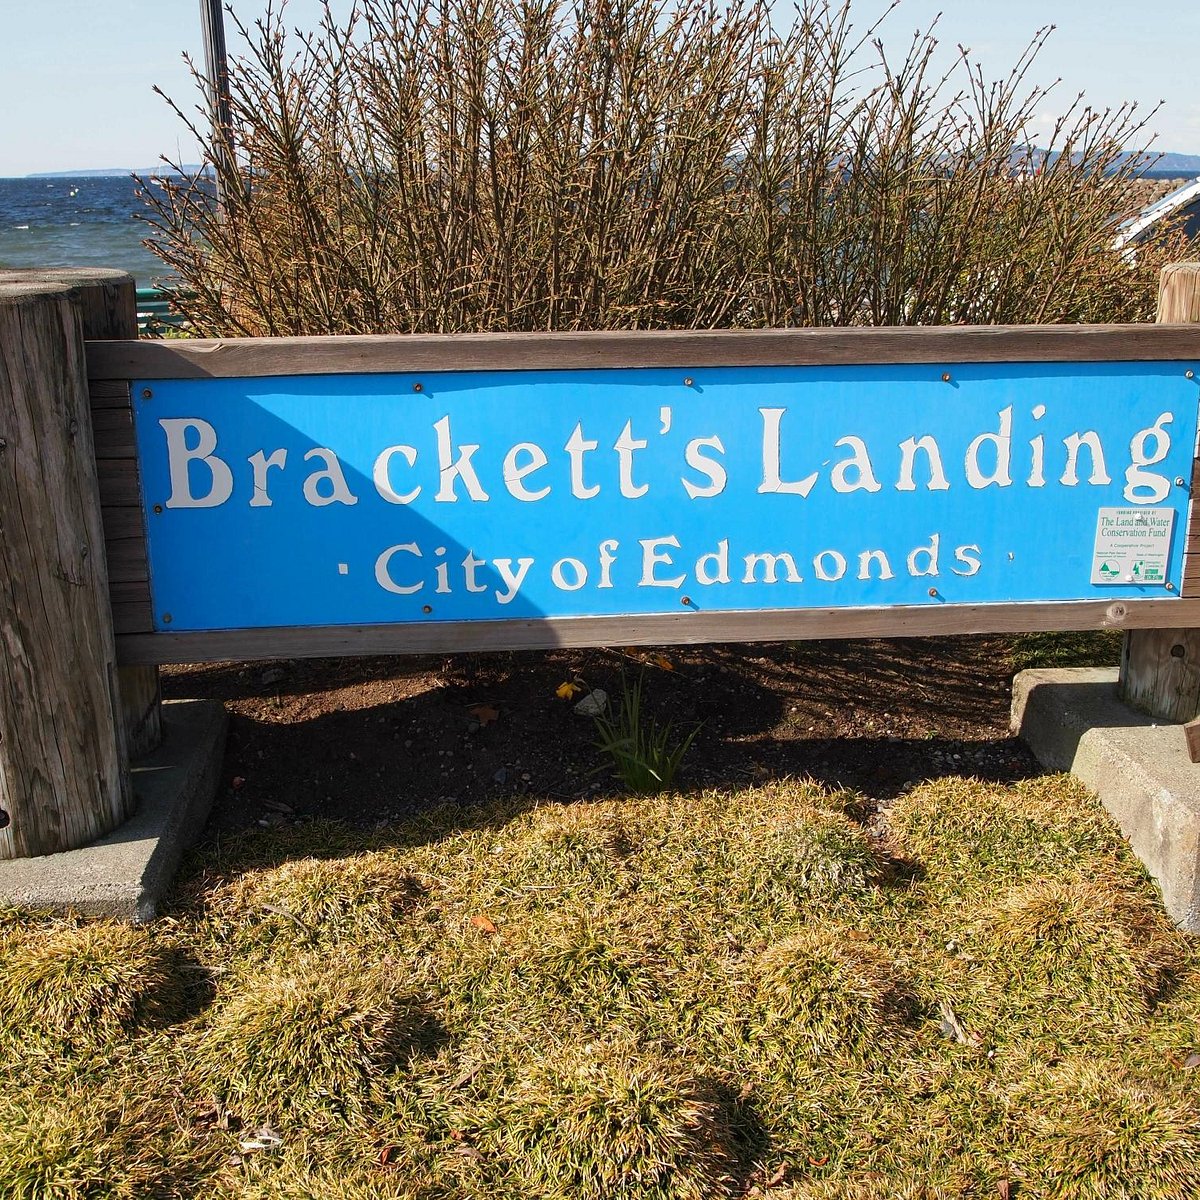 Brackett's Landing North (Edmonds) All You Need to Know BEFORE You Go